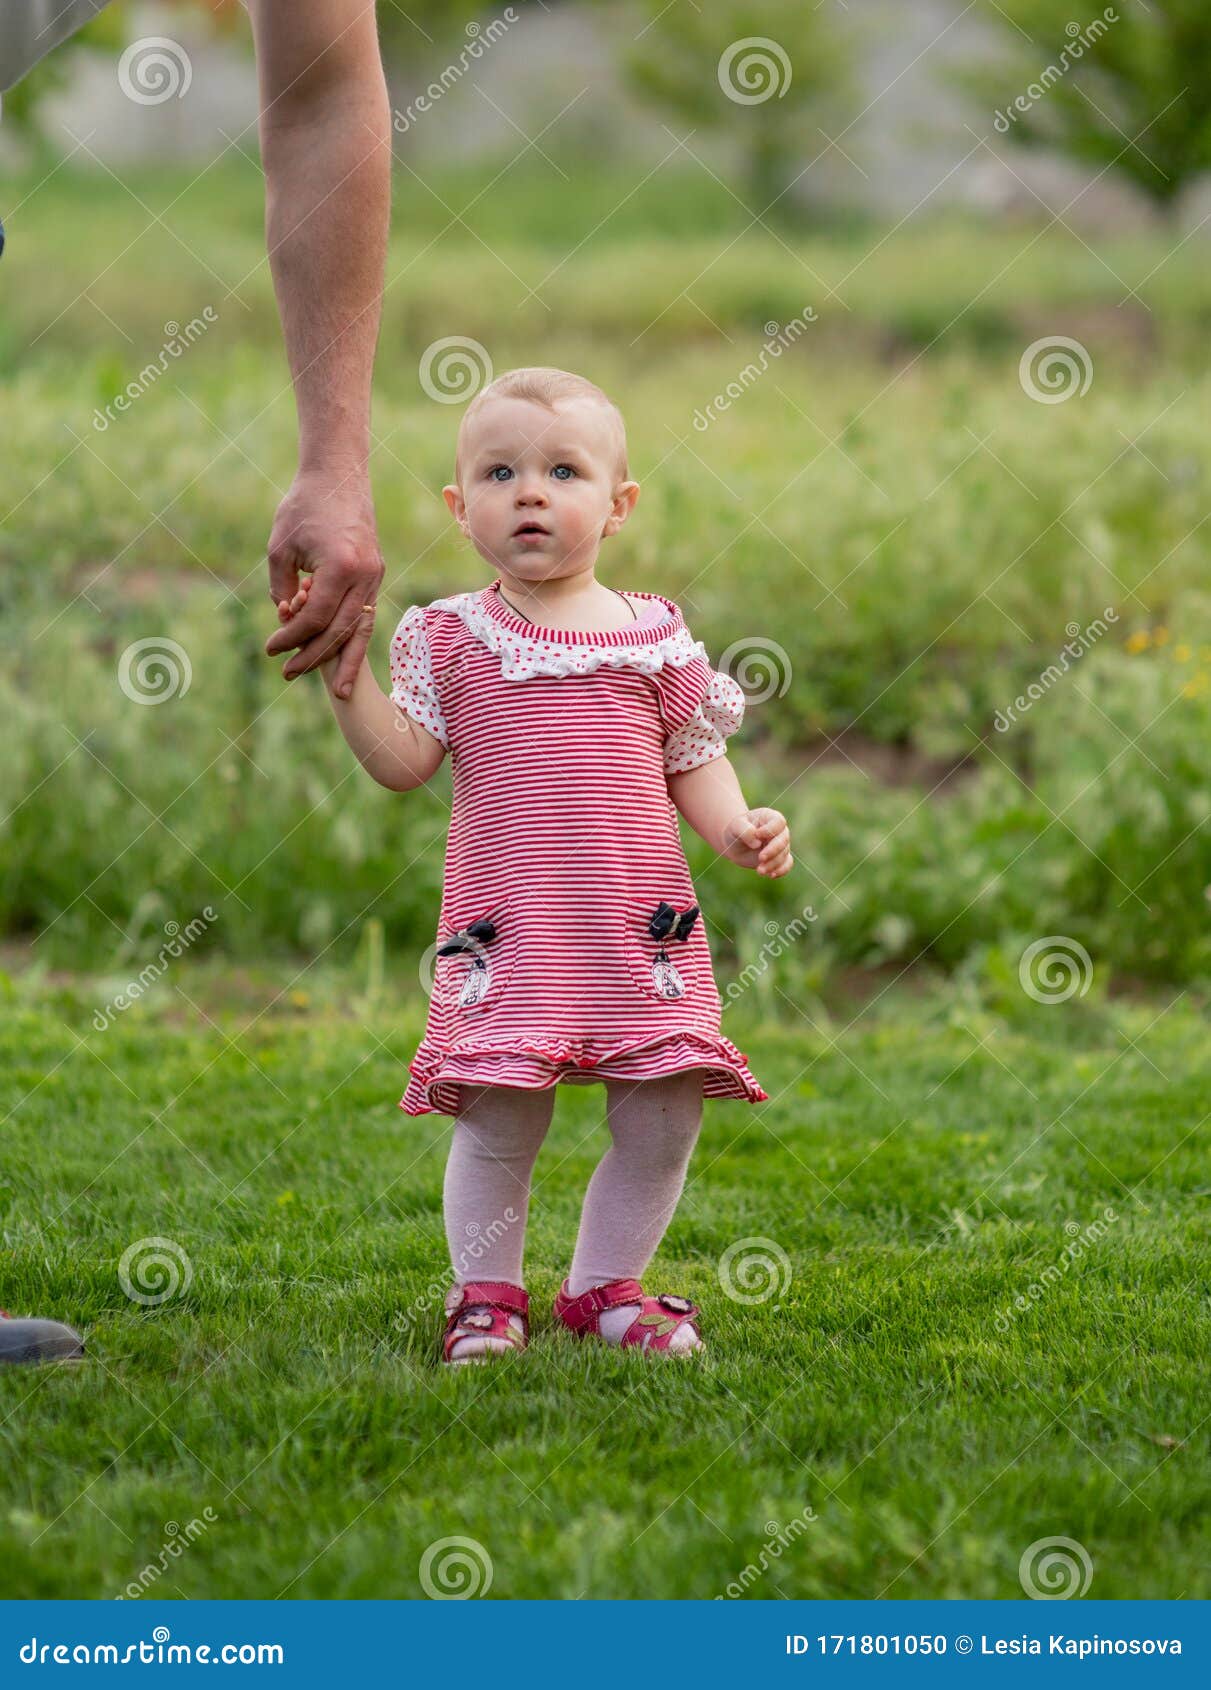 one year old baby walking